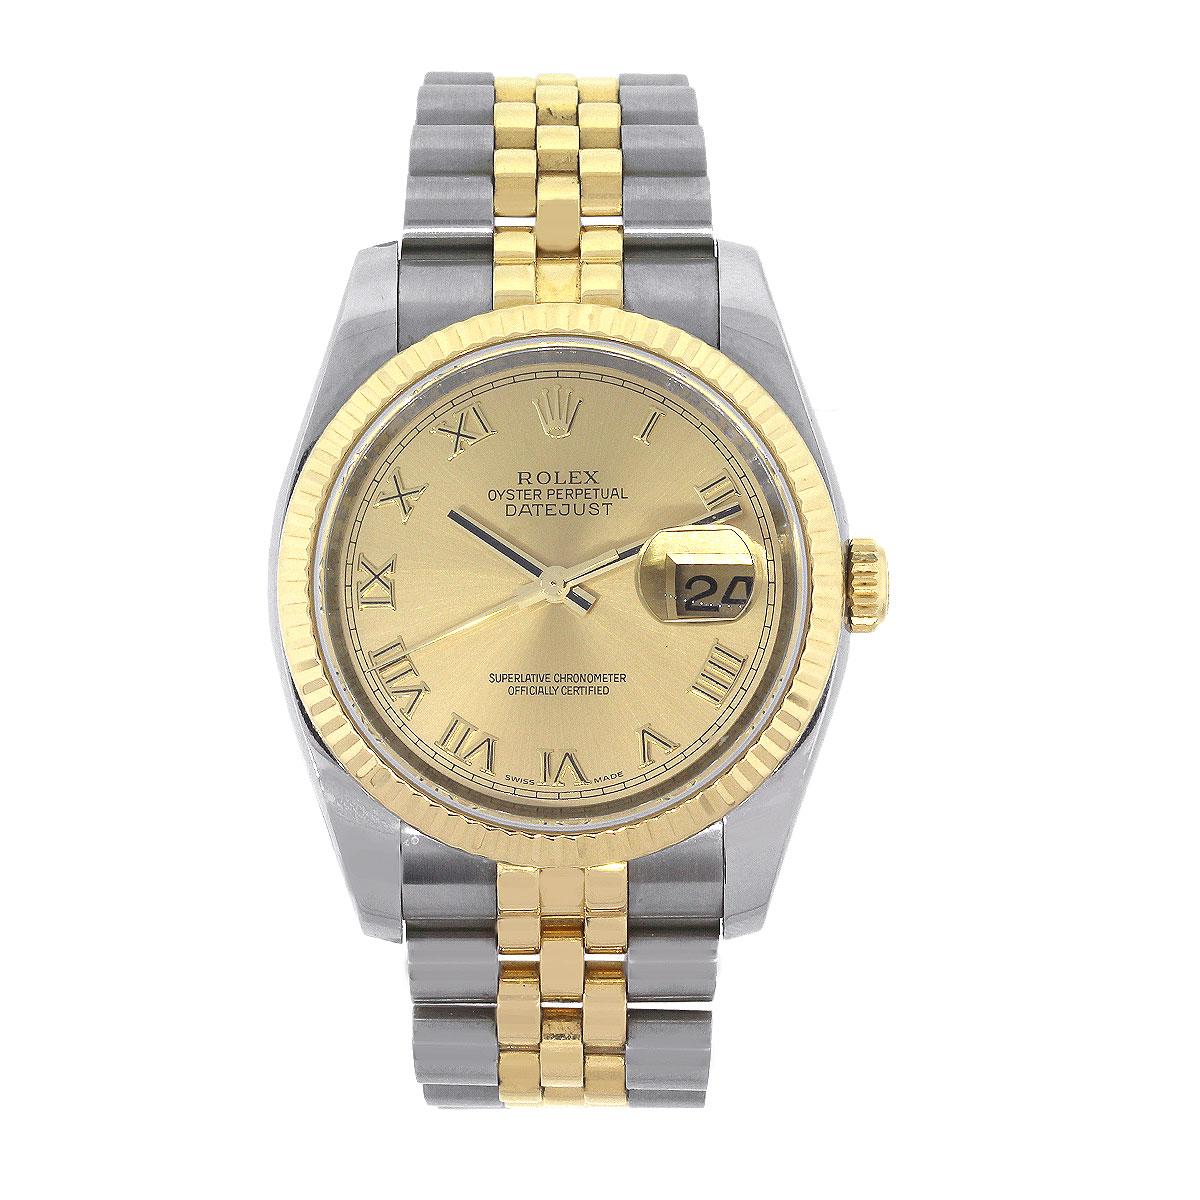 Brand: Rolex
MPN: 116233
Model: Datejust
Case Material: Stainless Steel
Case Diameter: 36mm
Crystal: Scratch resistant sapphire
Bezel: 18k Yellow Gold Fluted Bezel
Dial: Champagne dial with Roman numerals. Date window at the 3 o’clock